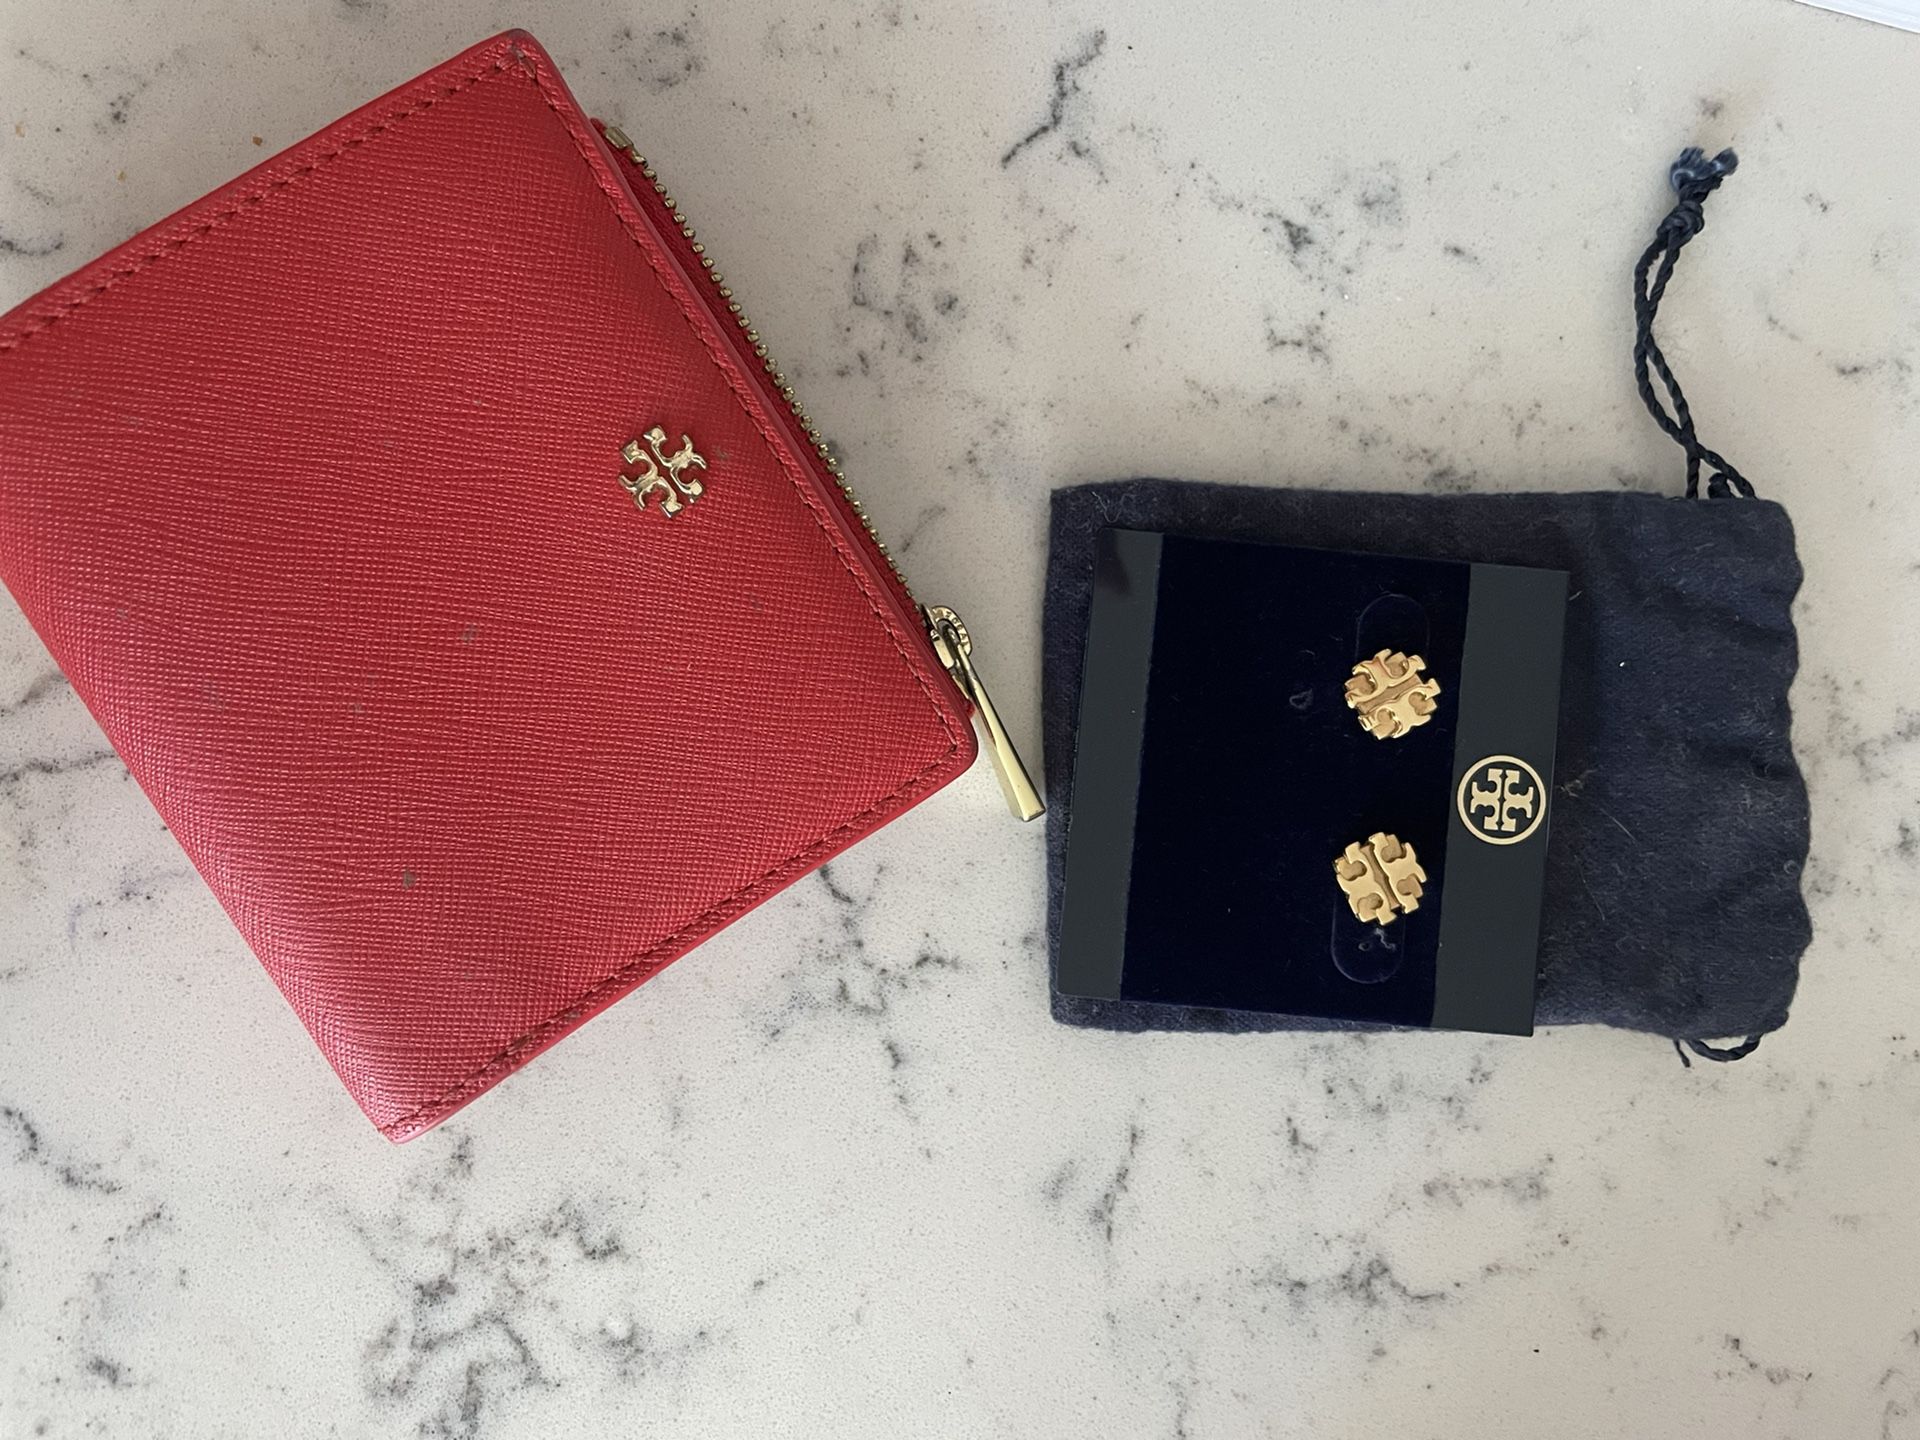 Tory Burch Leather Wallet And Earrings 